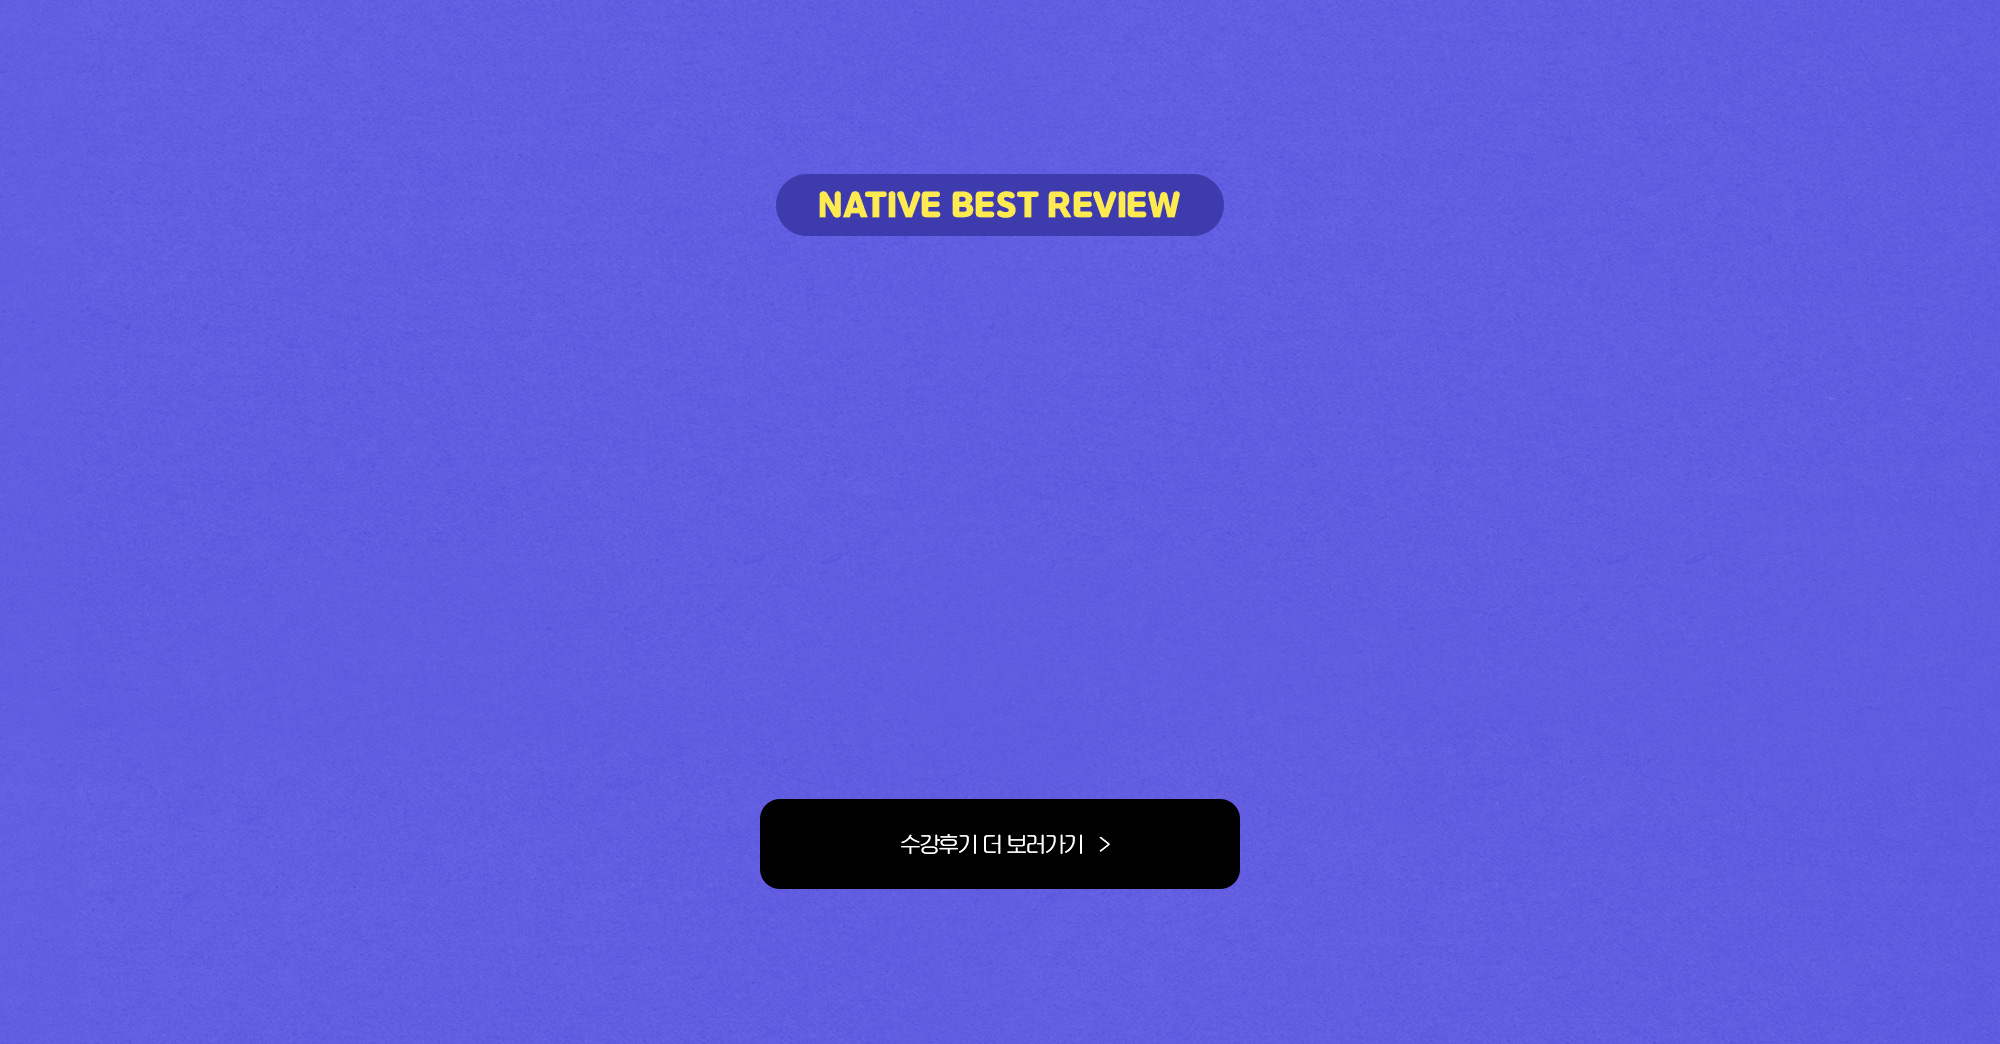 native best review